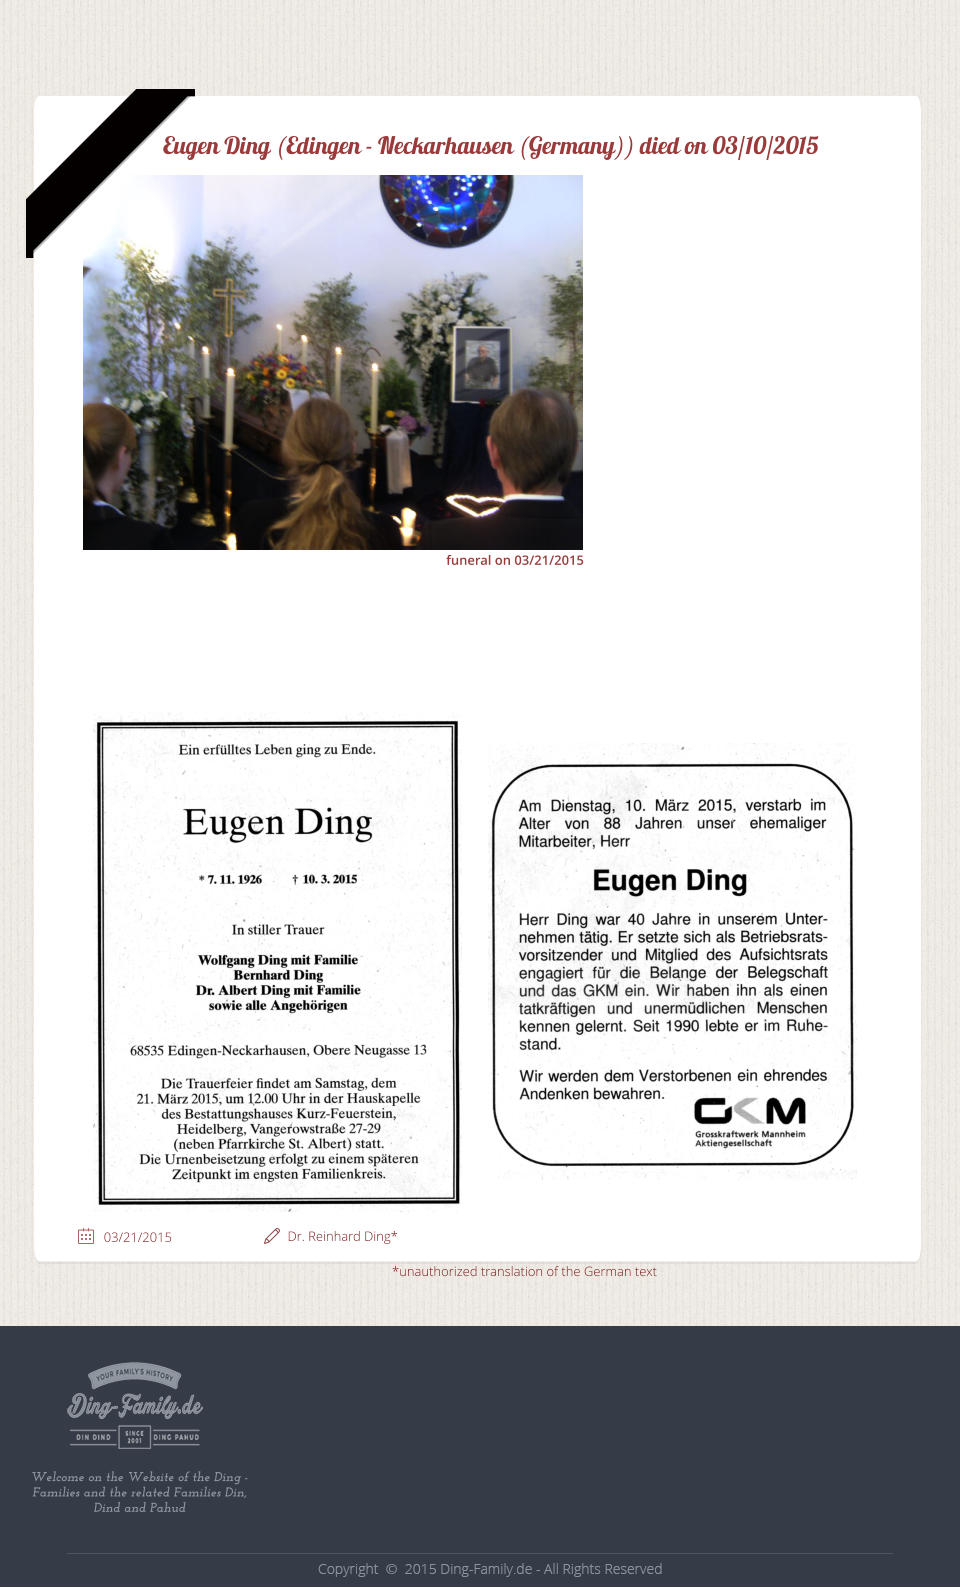 Welcome on the Website of the Ding - Families and the related Families Din, Dind and Pahud Eugen Ding (Edingen - Neckarhausen (Germany)) died on 03/10/2015  Dr. Reinhard Ding* 03/21/2015 funeral on 03/21/2015 *unauthorized translation of the German text